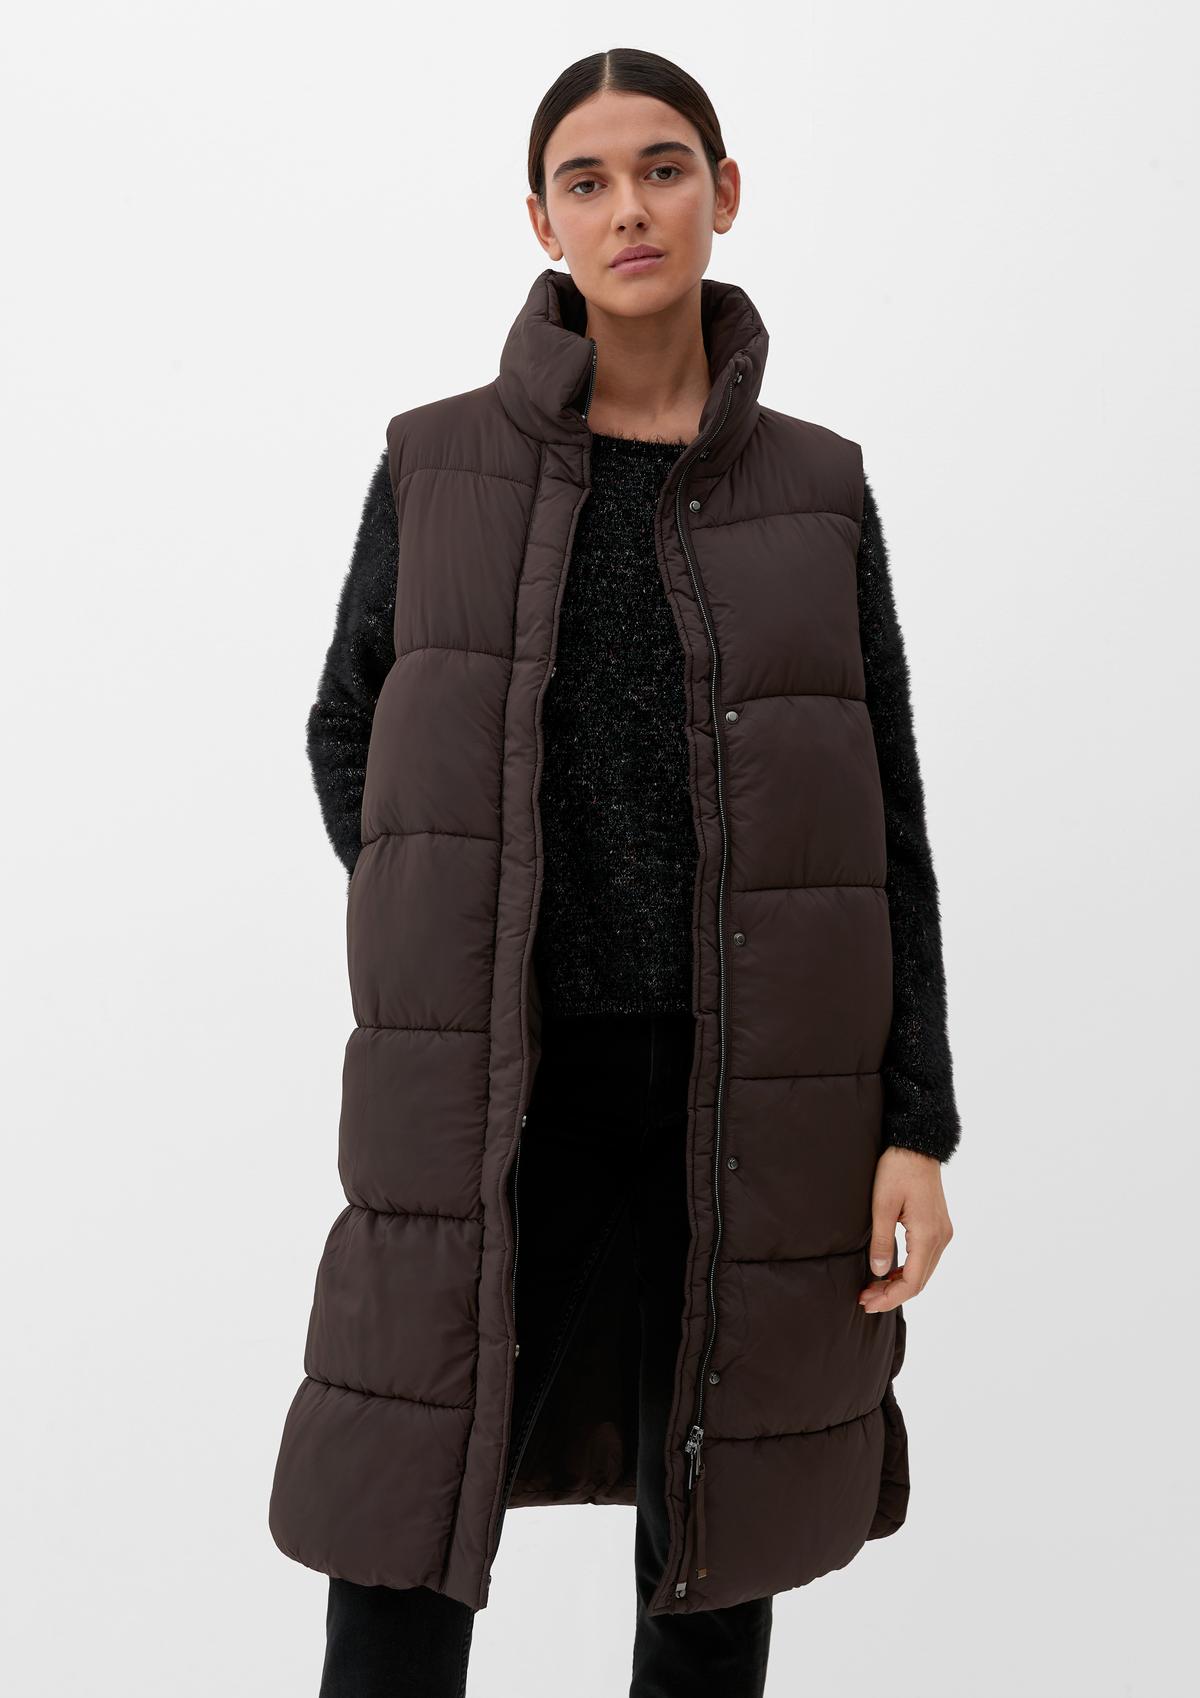 s.Oliver Long quilted body warmer with a stand-up collar